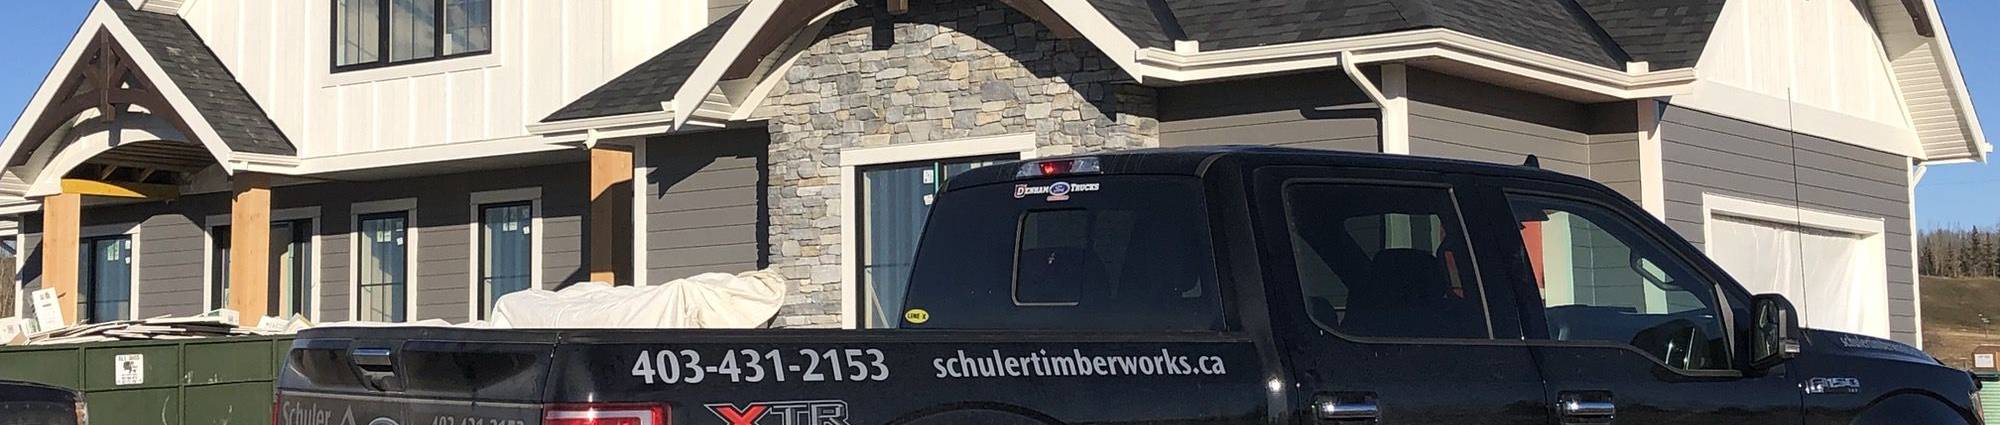 Large timber frame home and Schuler TImberworks truck